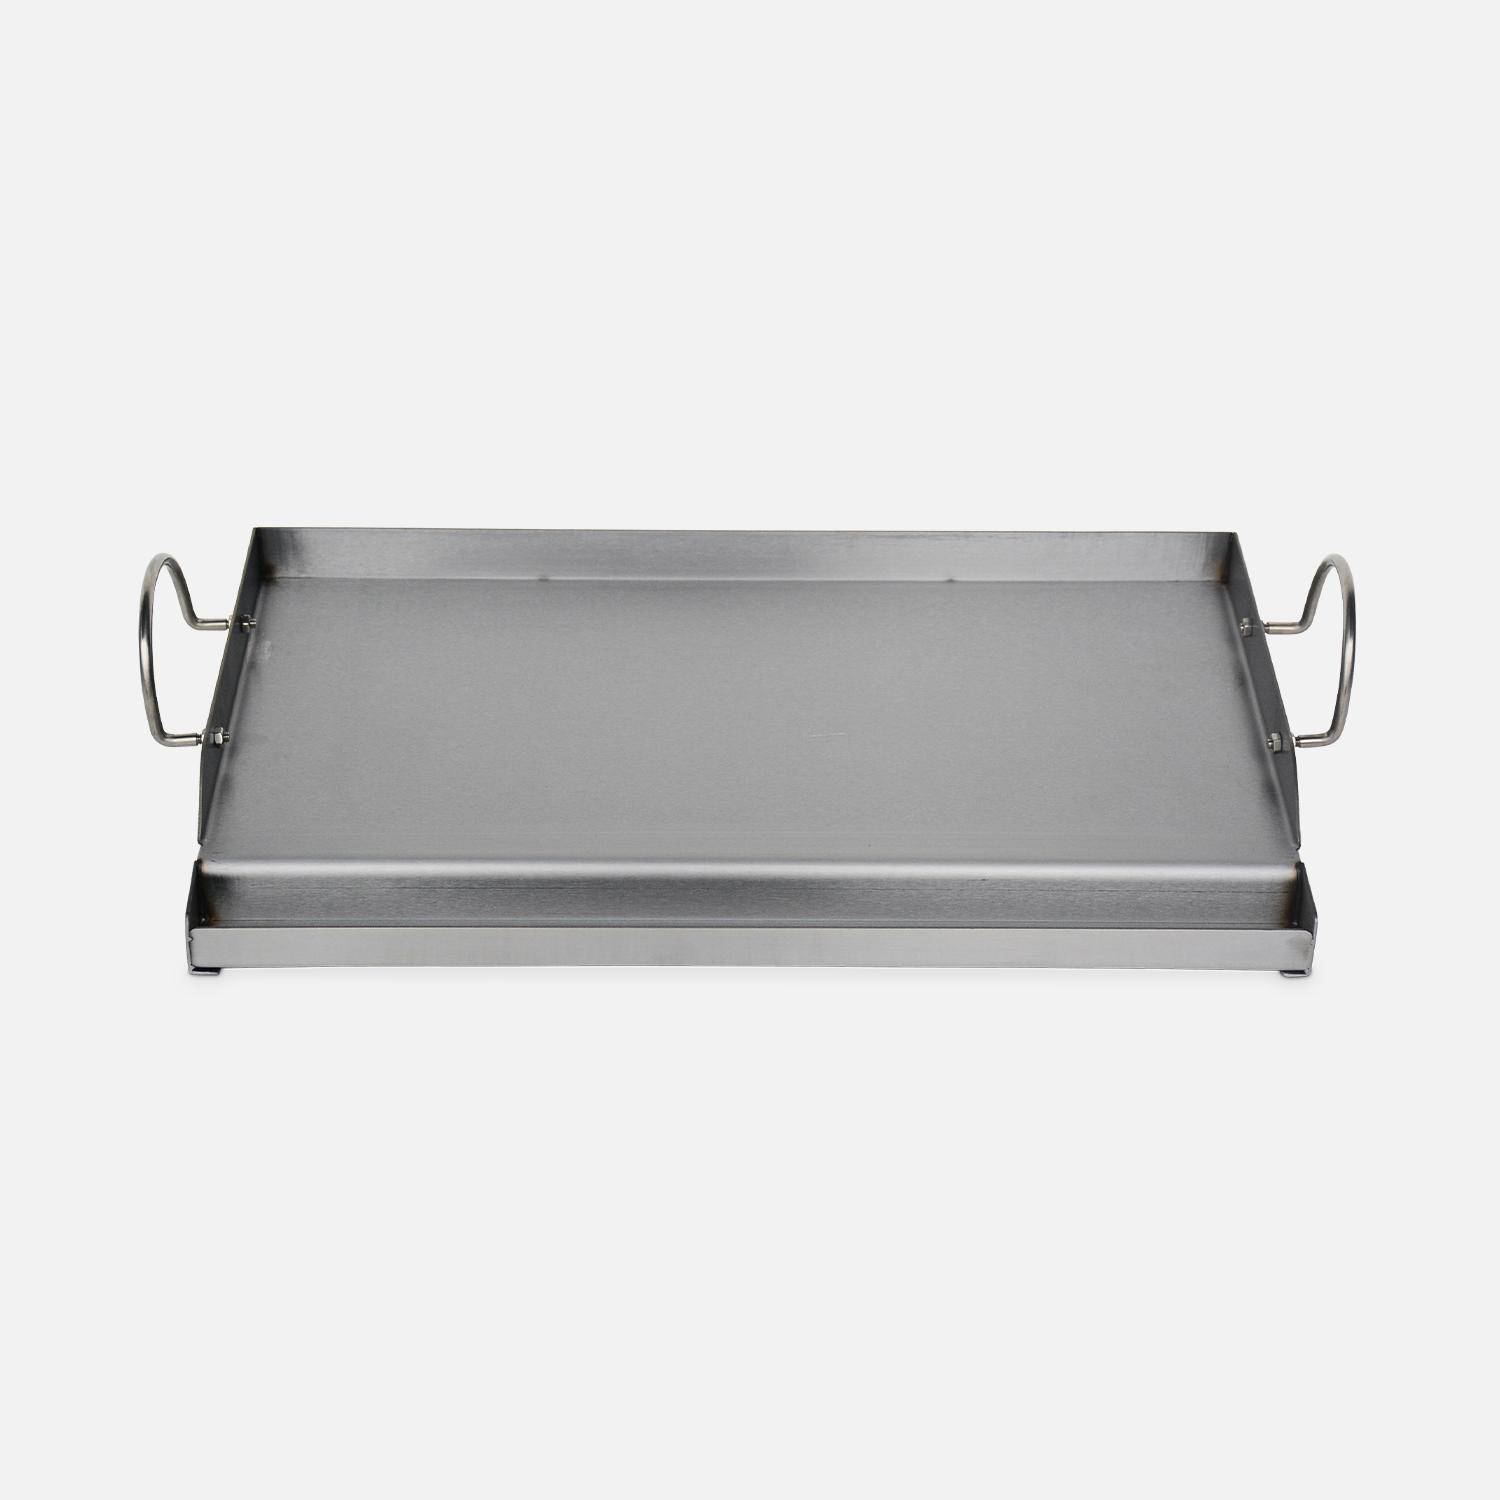 55cm Universal griddle for barbecue Photo4